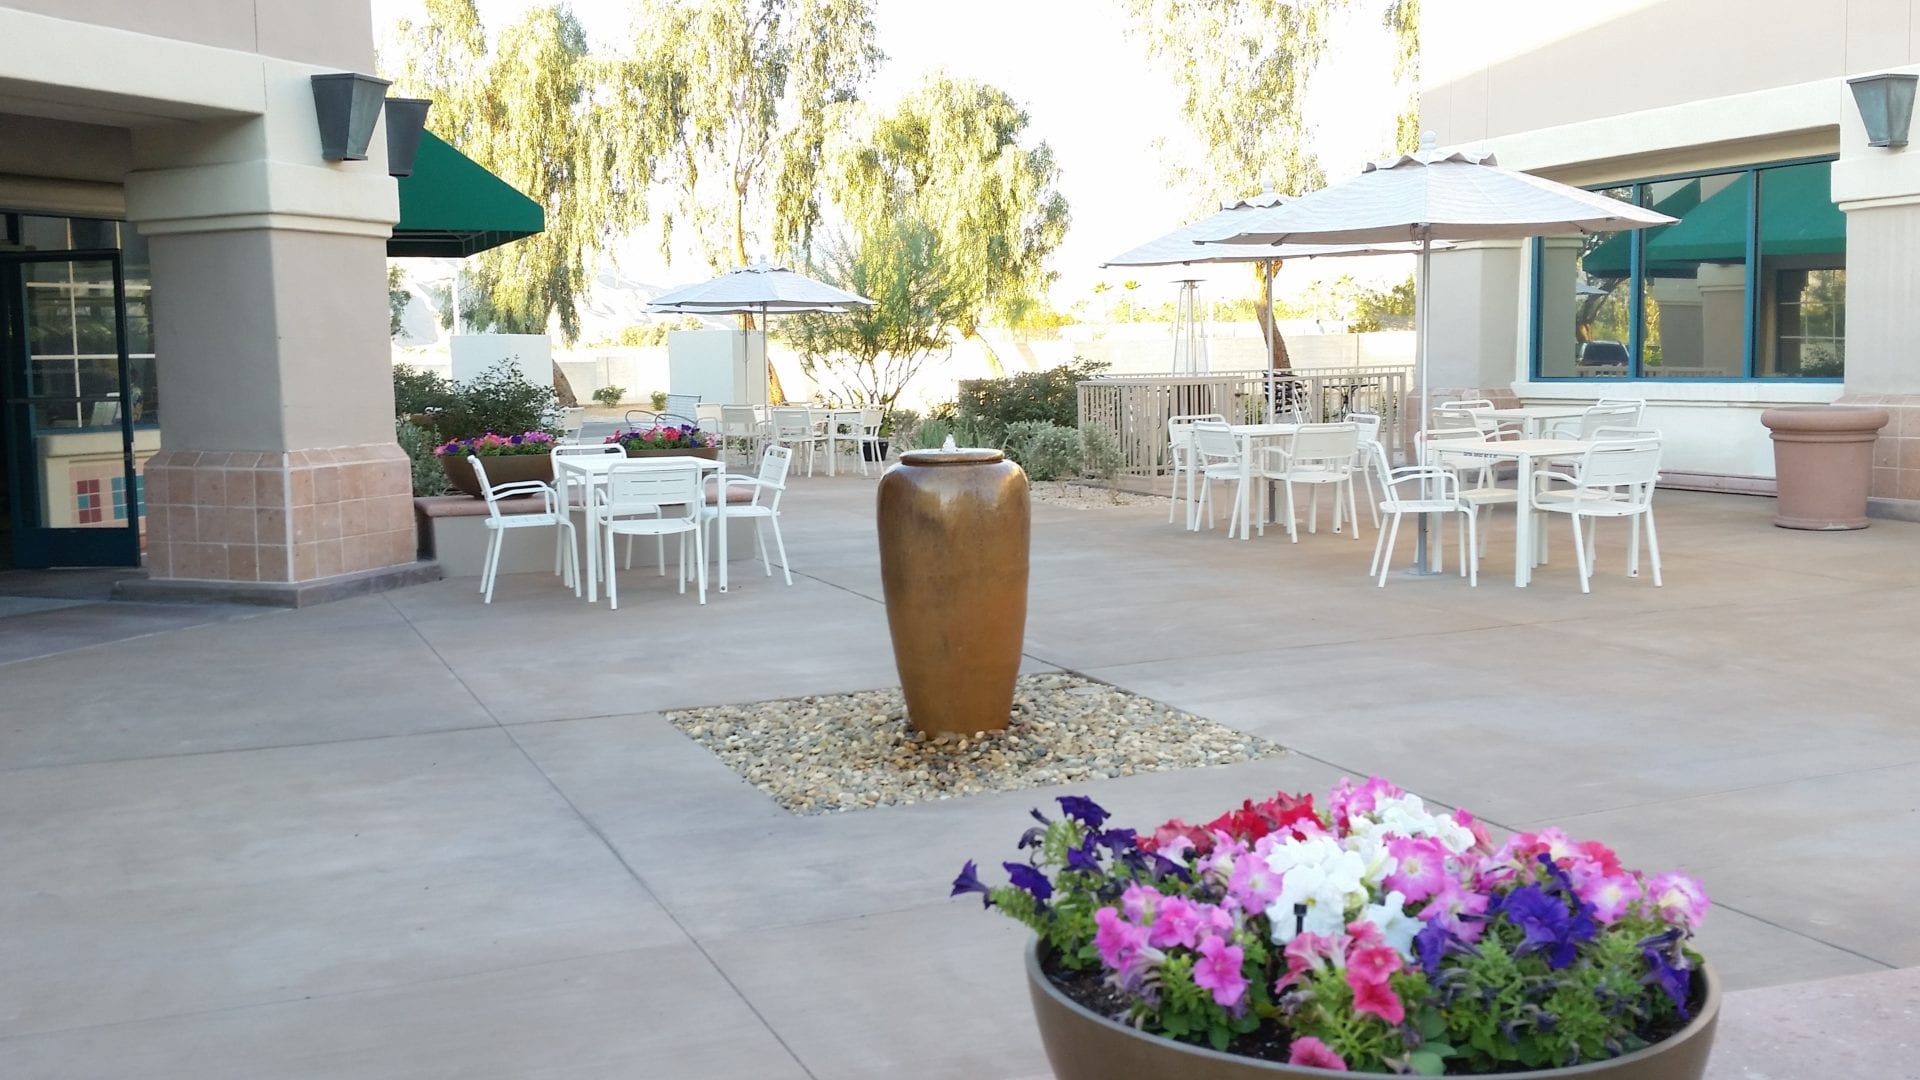 Rancho Mirage Marketplace's Newly Sustainable Revamp